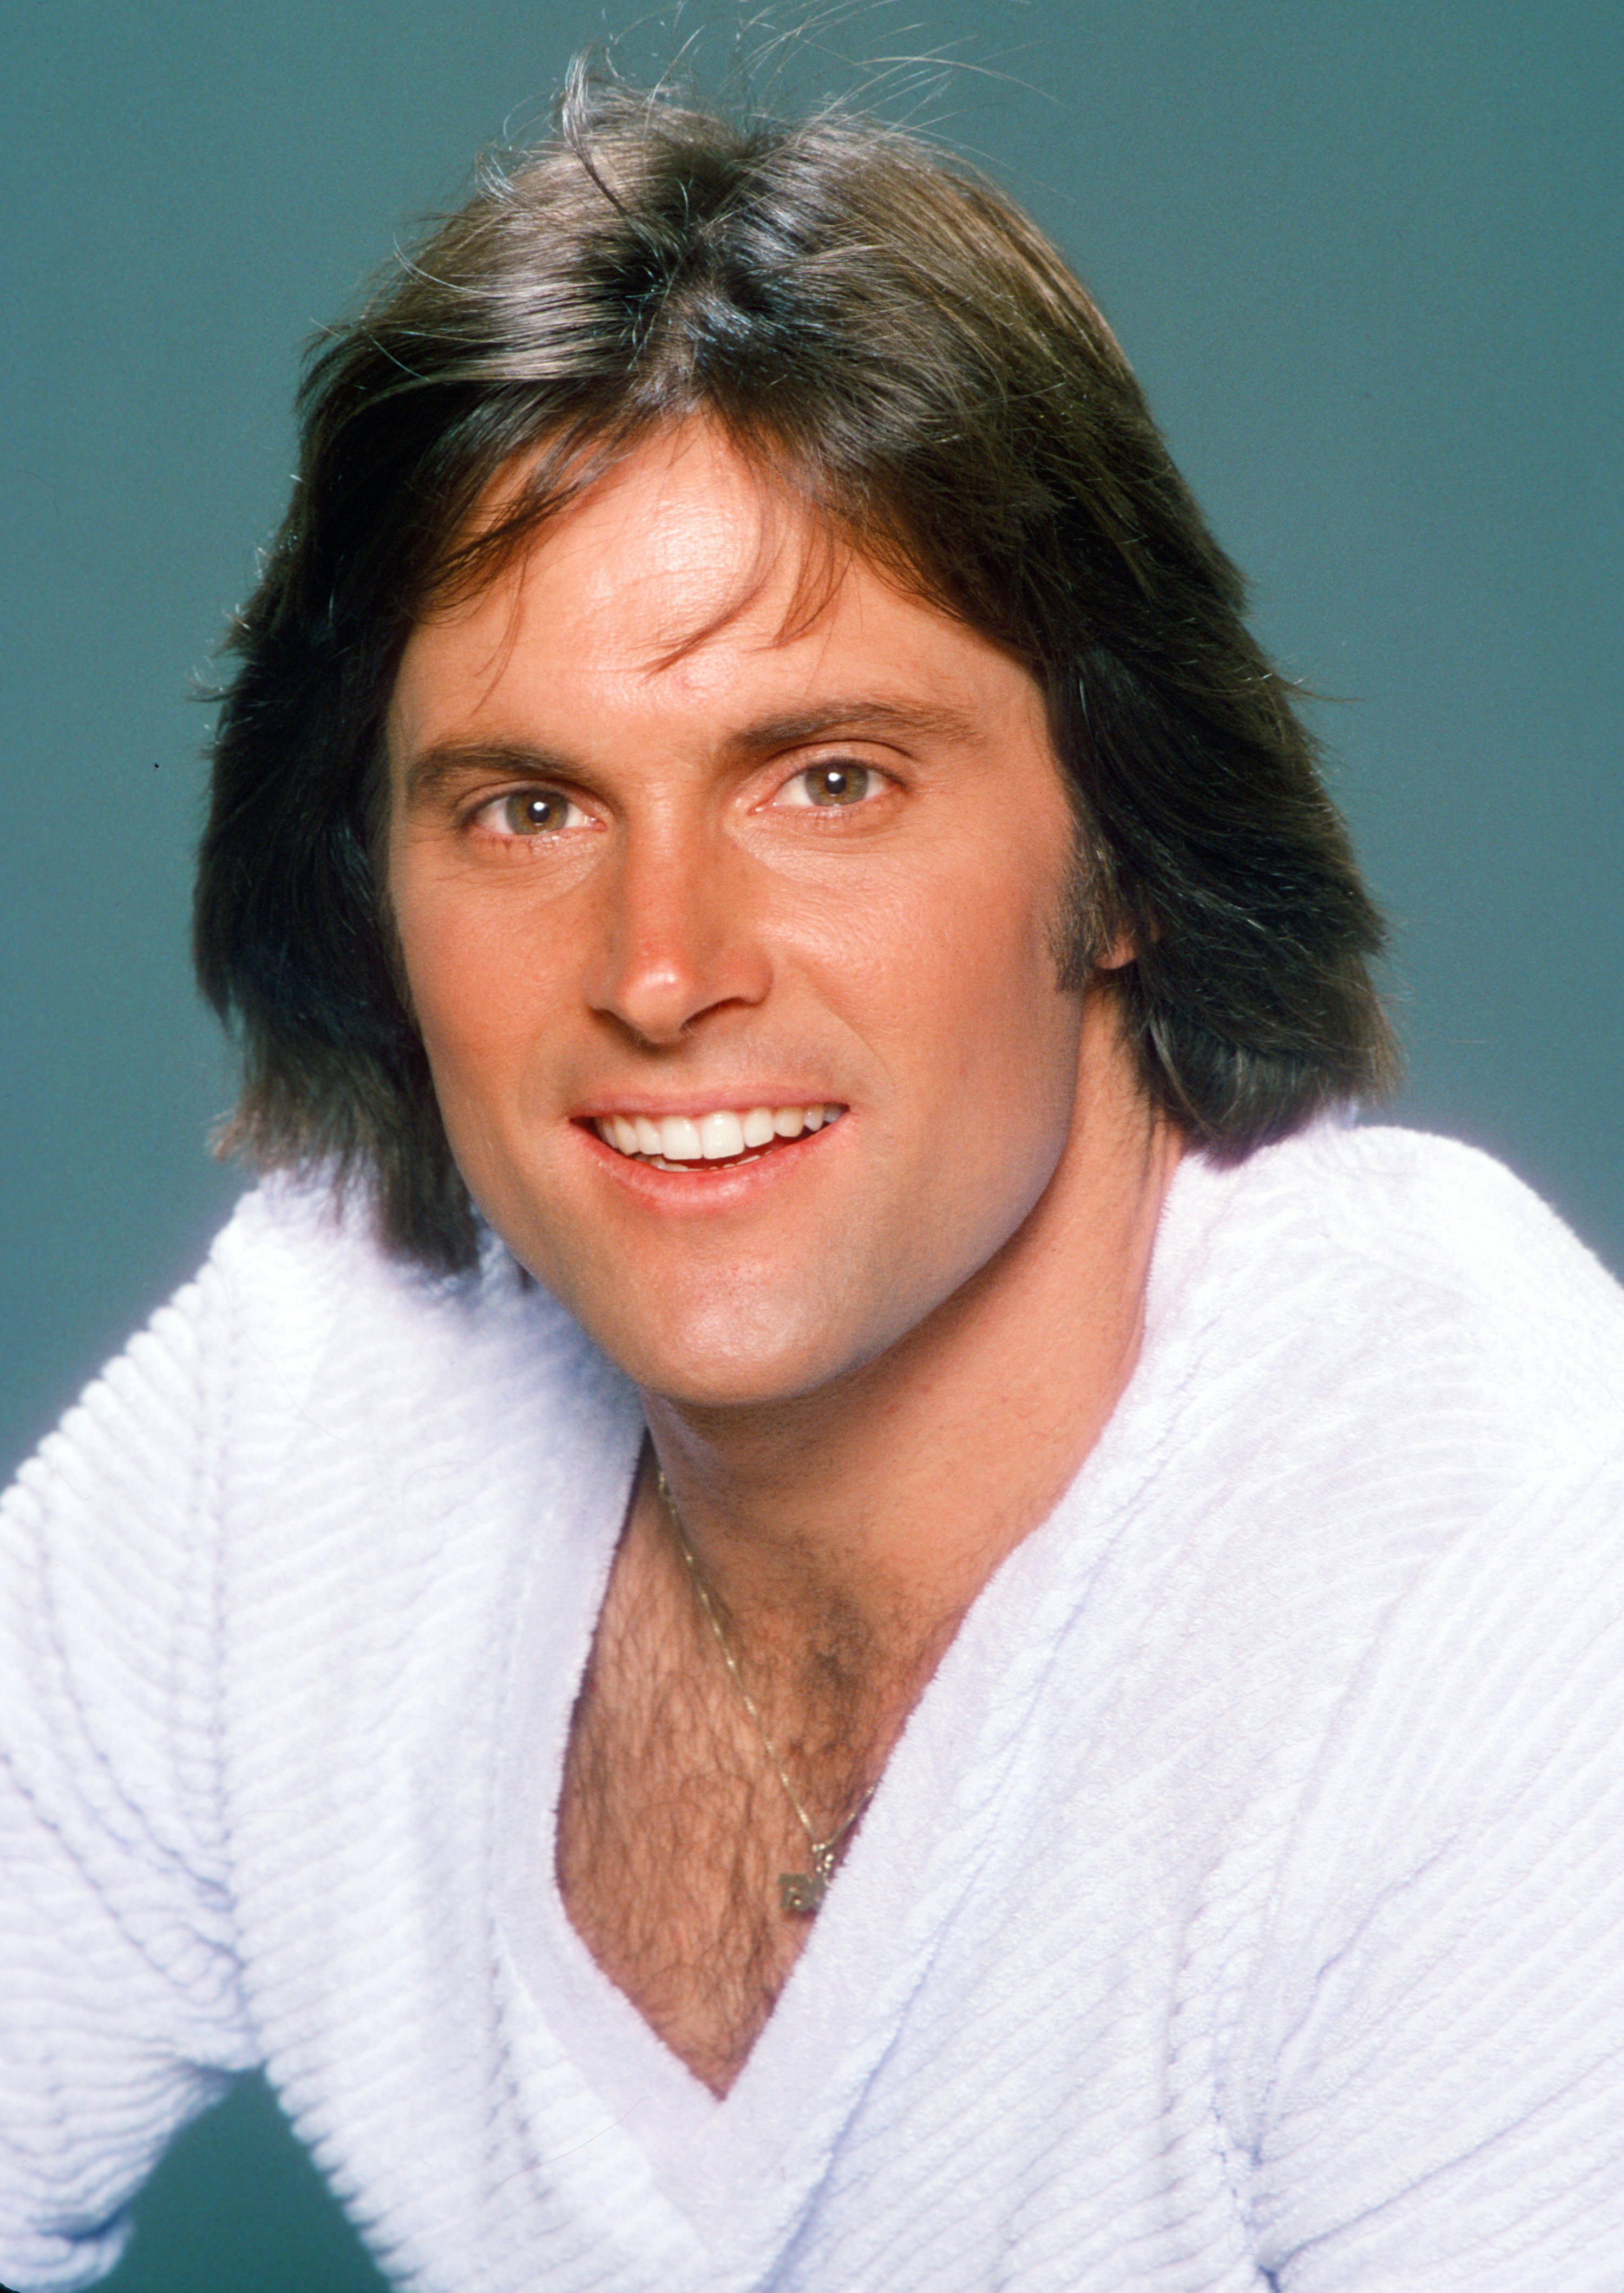 Bruce Jenner poses for a portrait in 1978 | Source: Getty Images